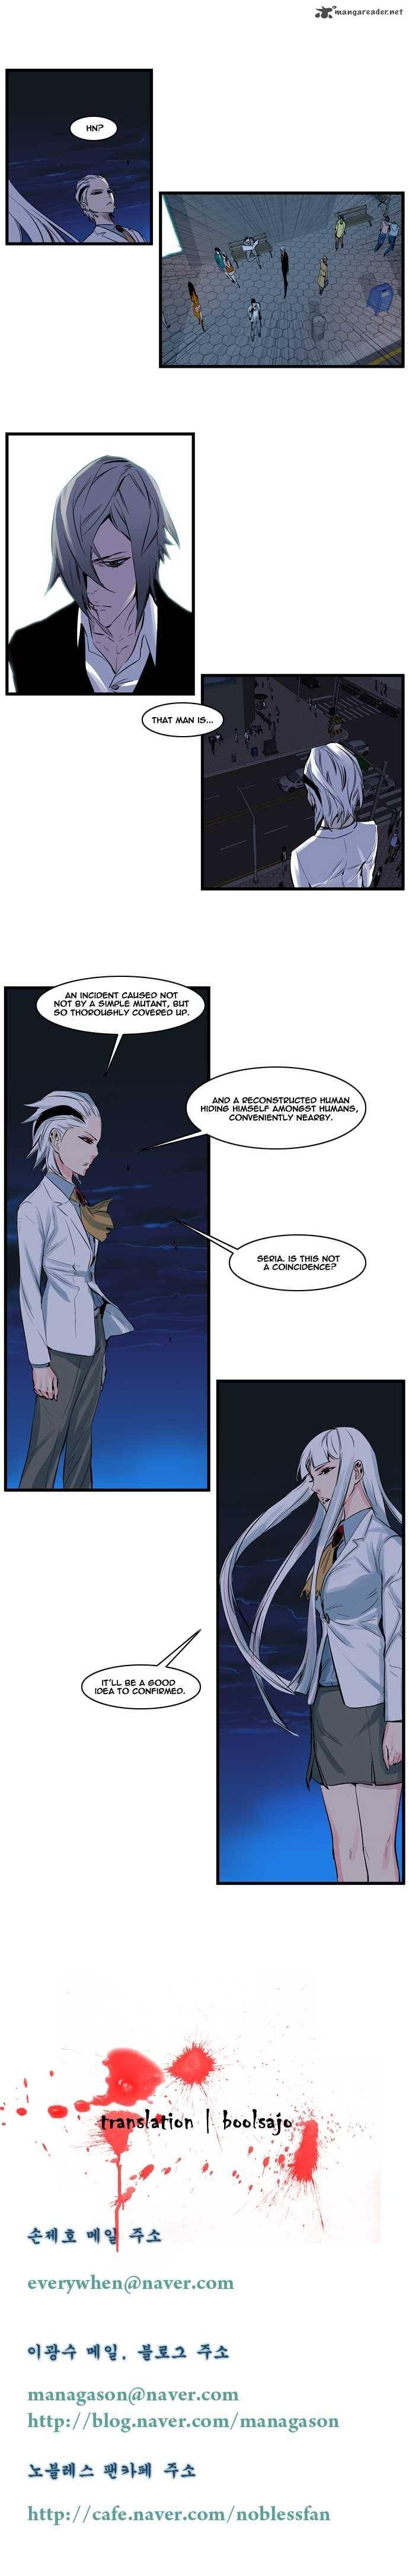 Noblesse 104 6